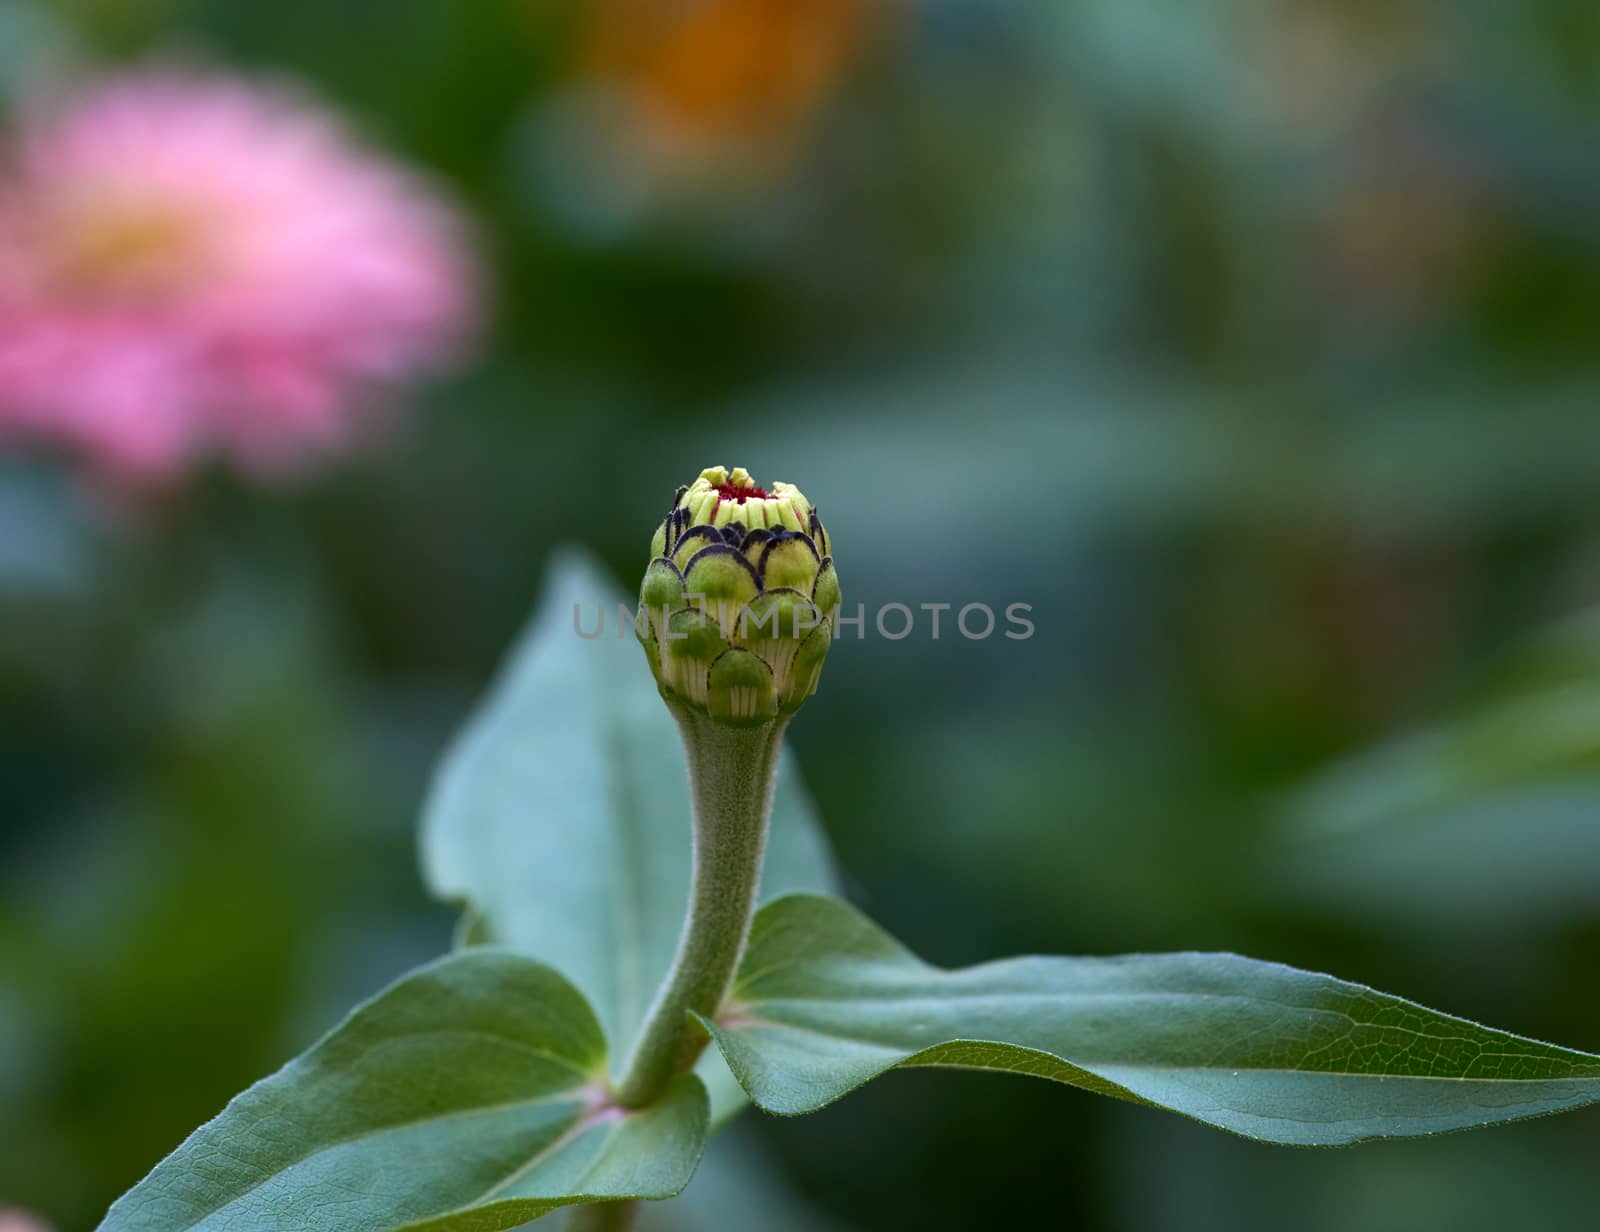 zinnia flower stalk with green leaves and unblown bud, close up